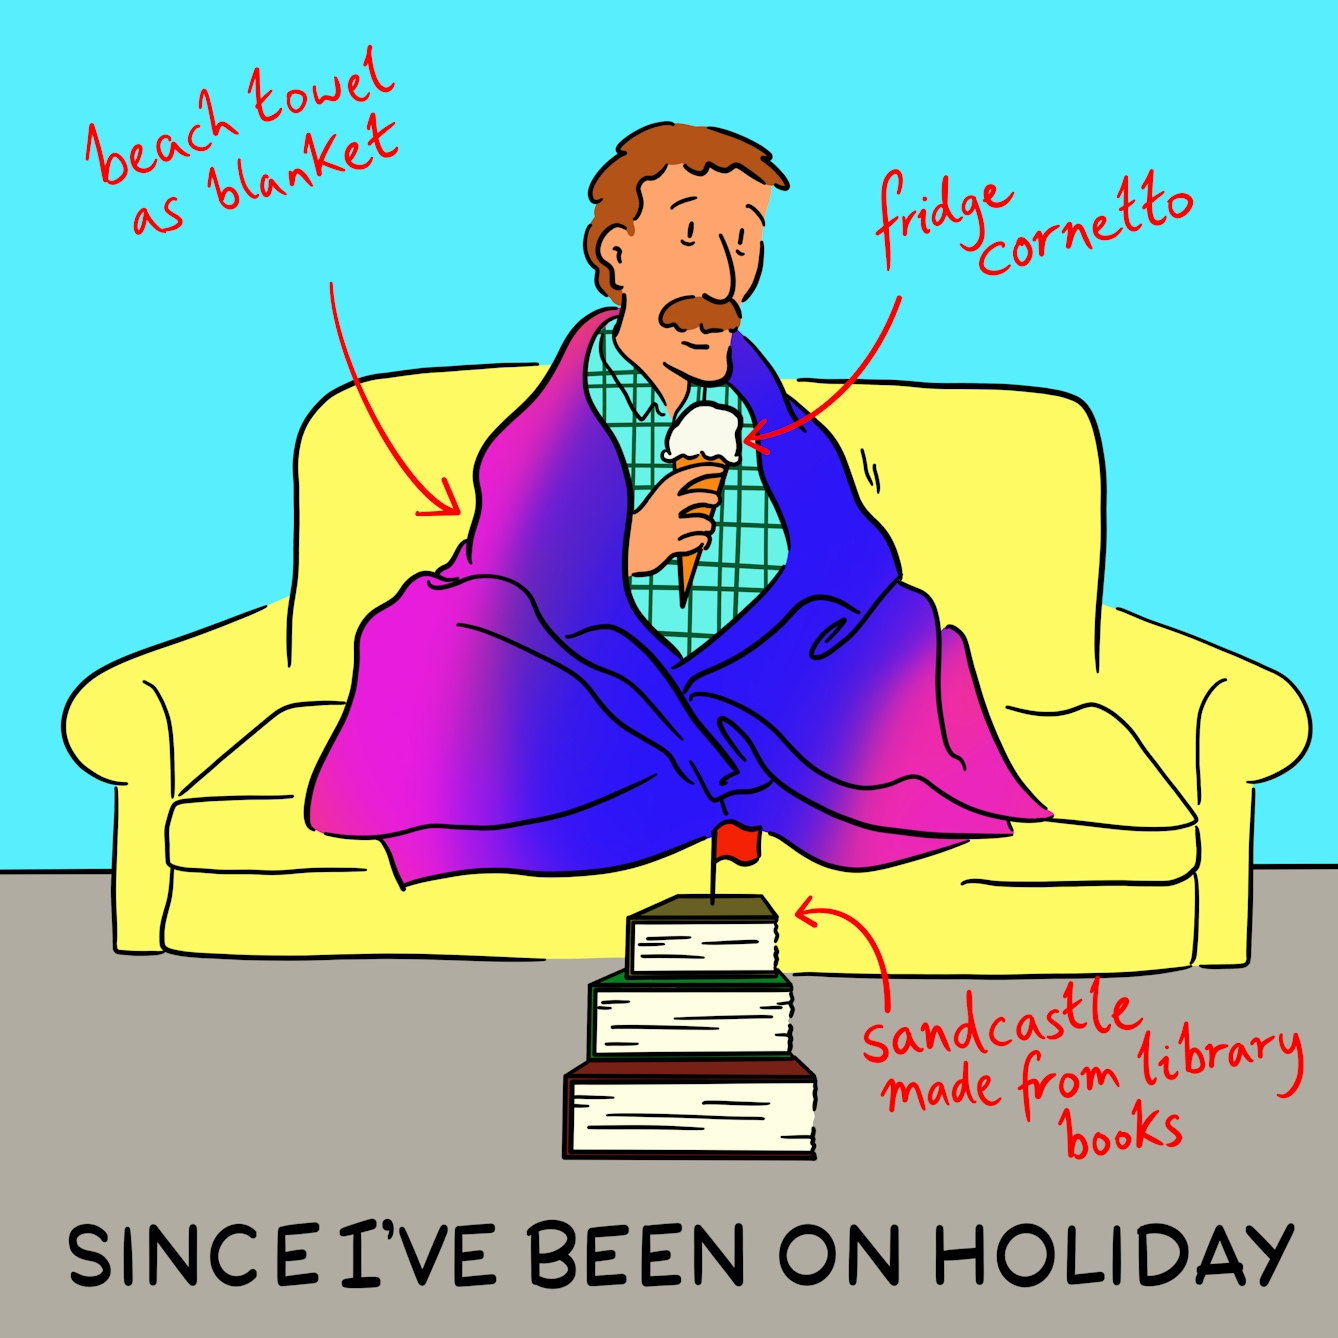 Panel 3 of a four-panel comic drawn digitally: a man with a plaid shirt and moustache leans sits on a sofa with a beach towel as a blanket over his shoulders, eating a Cornetto ice cream. In front of him is a sandcastle made from library books with a little red flag on top.
The caption text reads "since I've been on holiday"